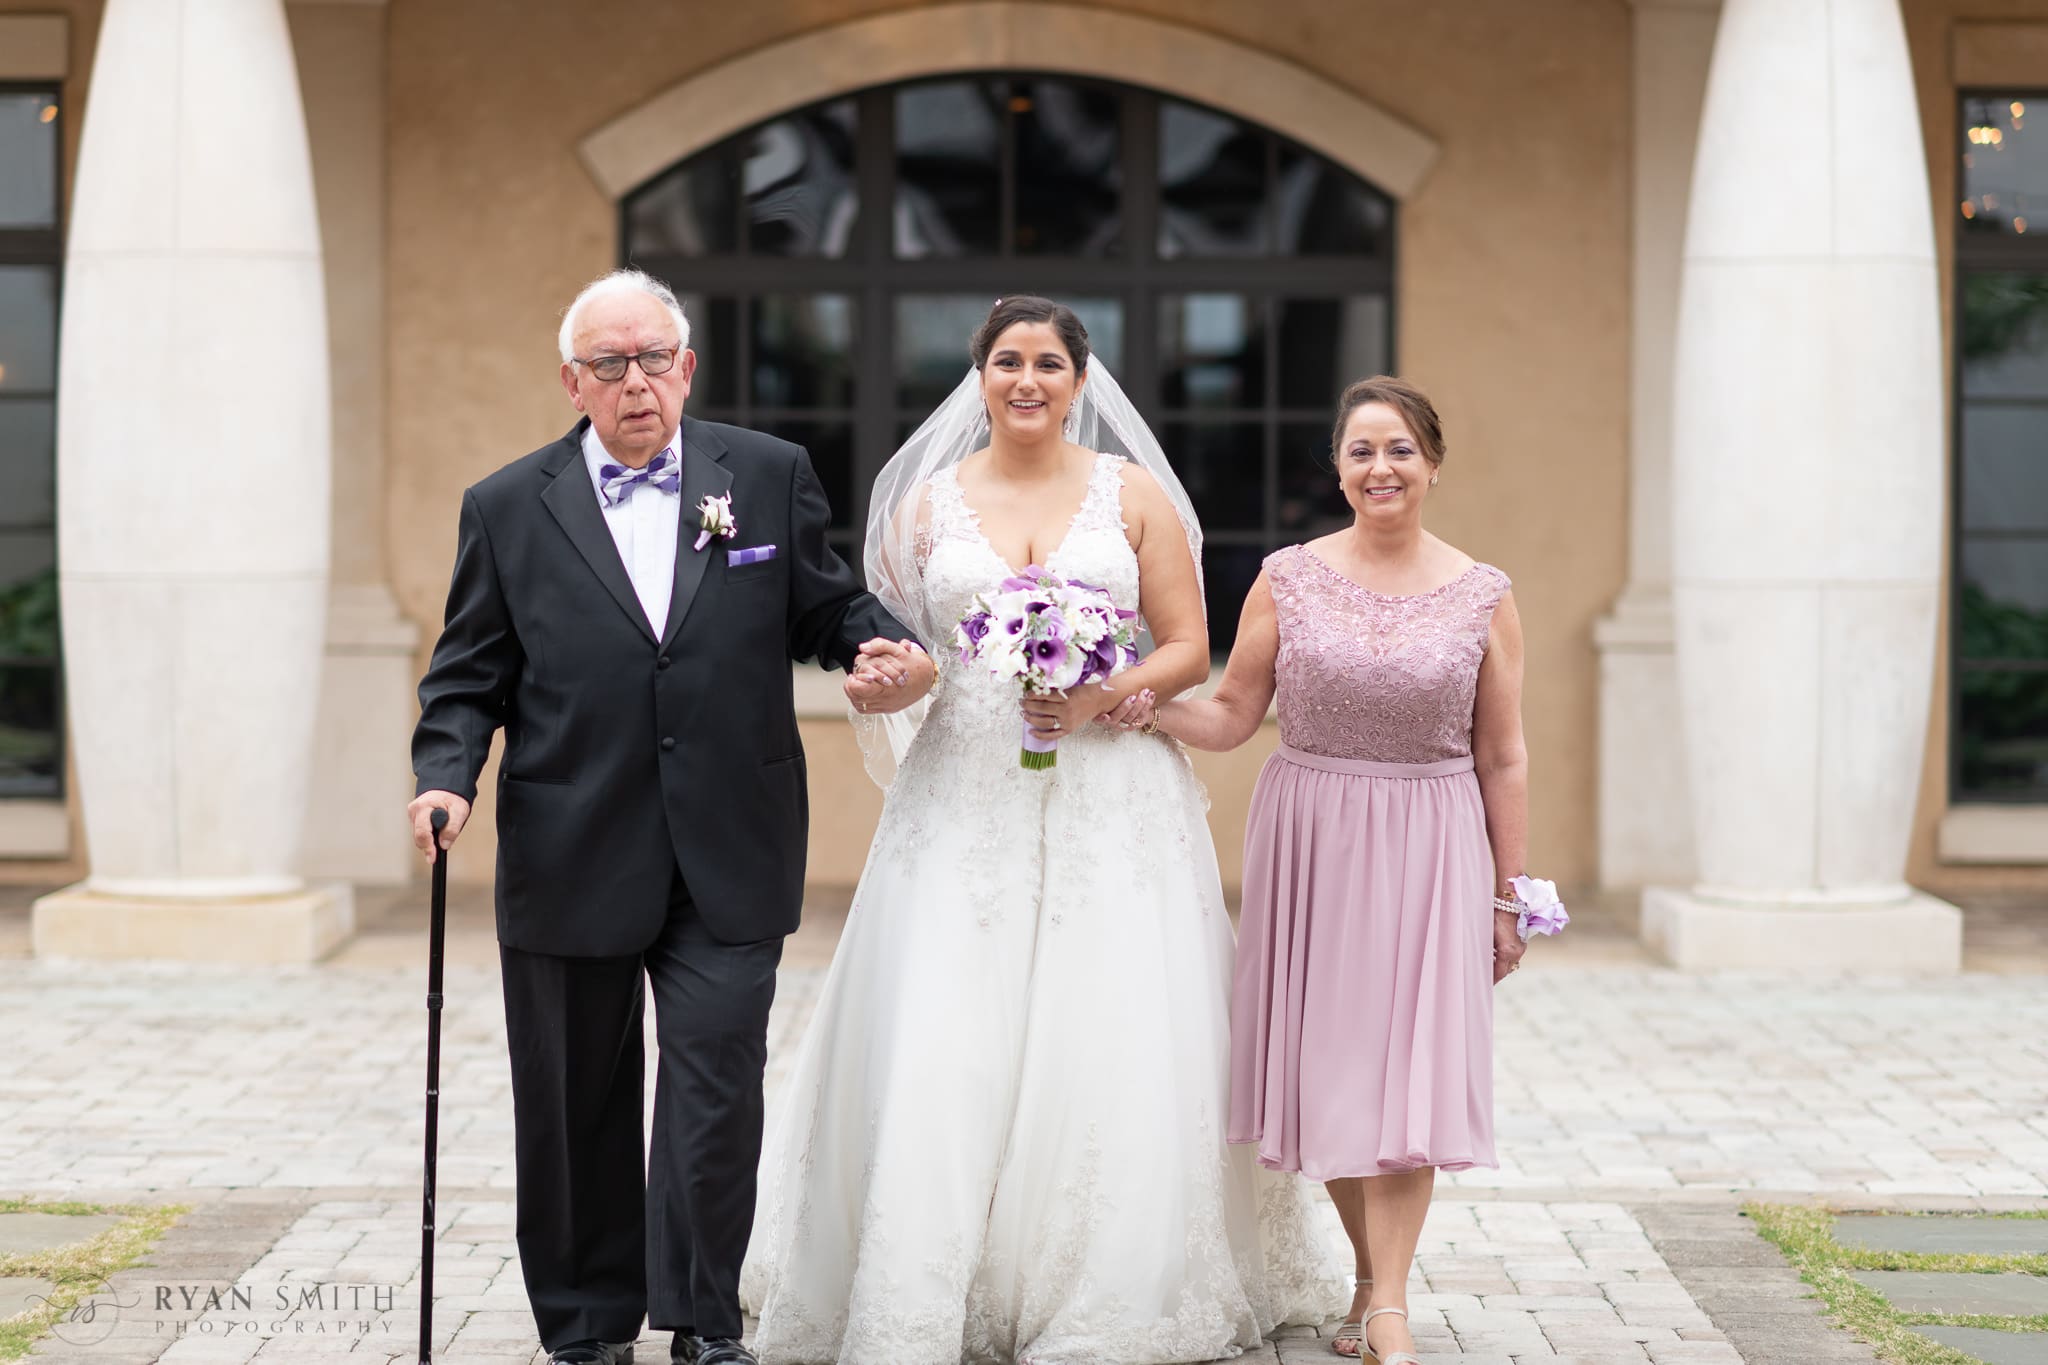 Bride walking down aisle with parents - 21 Main Events at North Beach